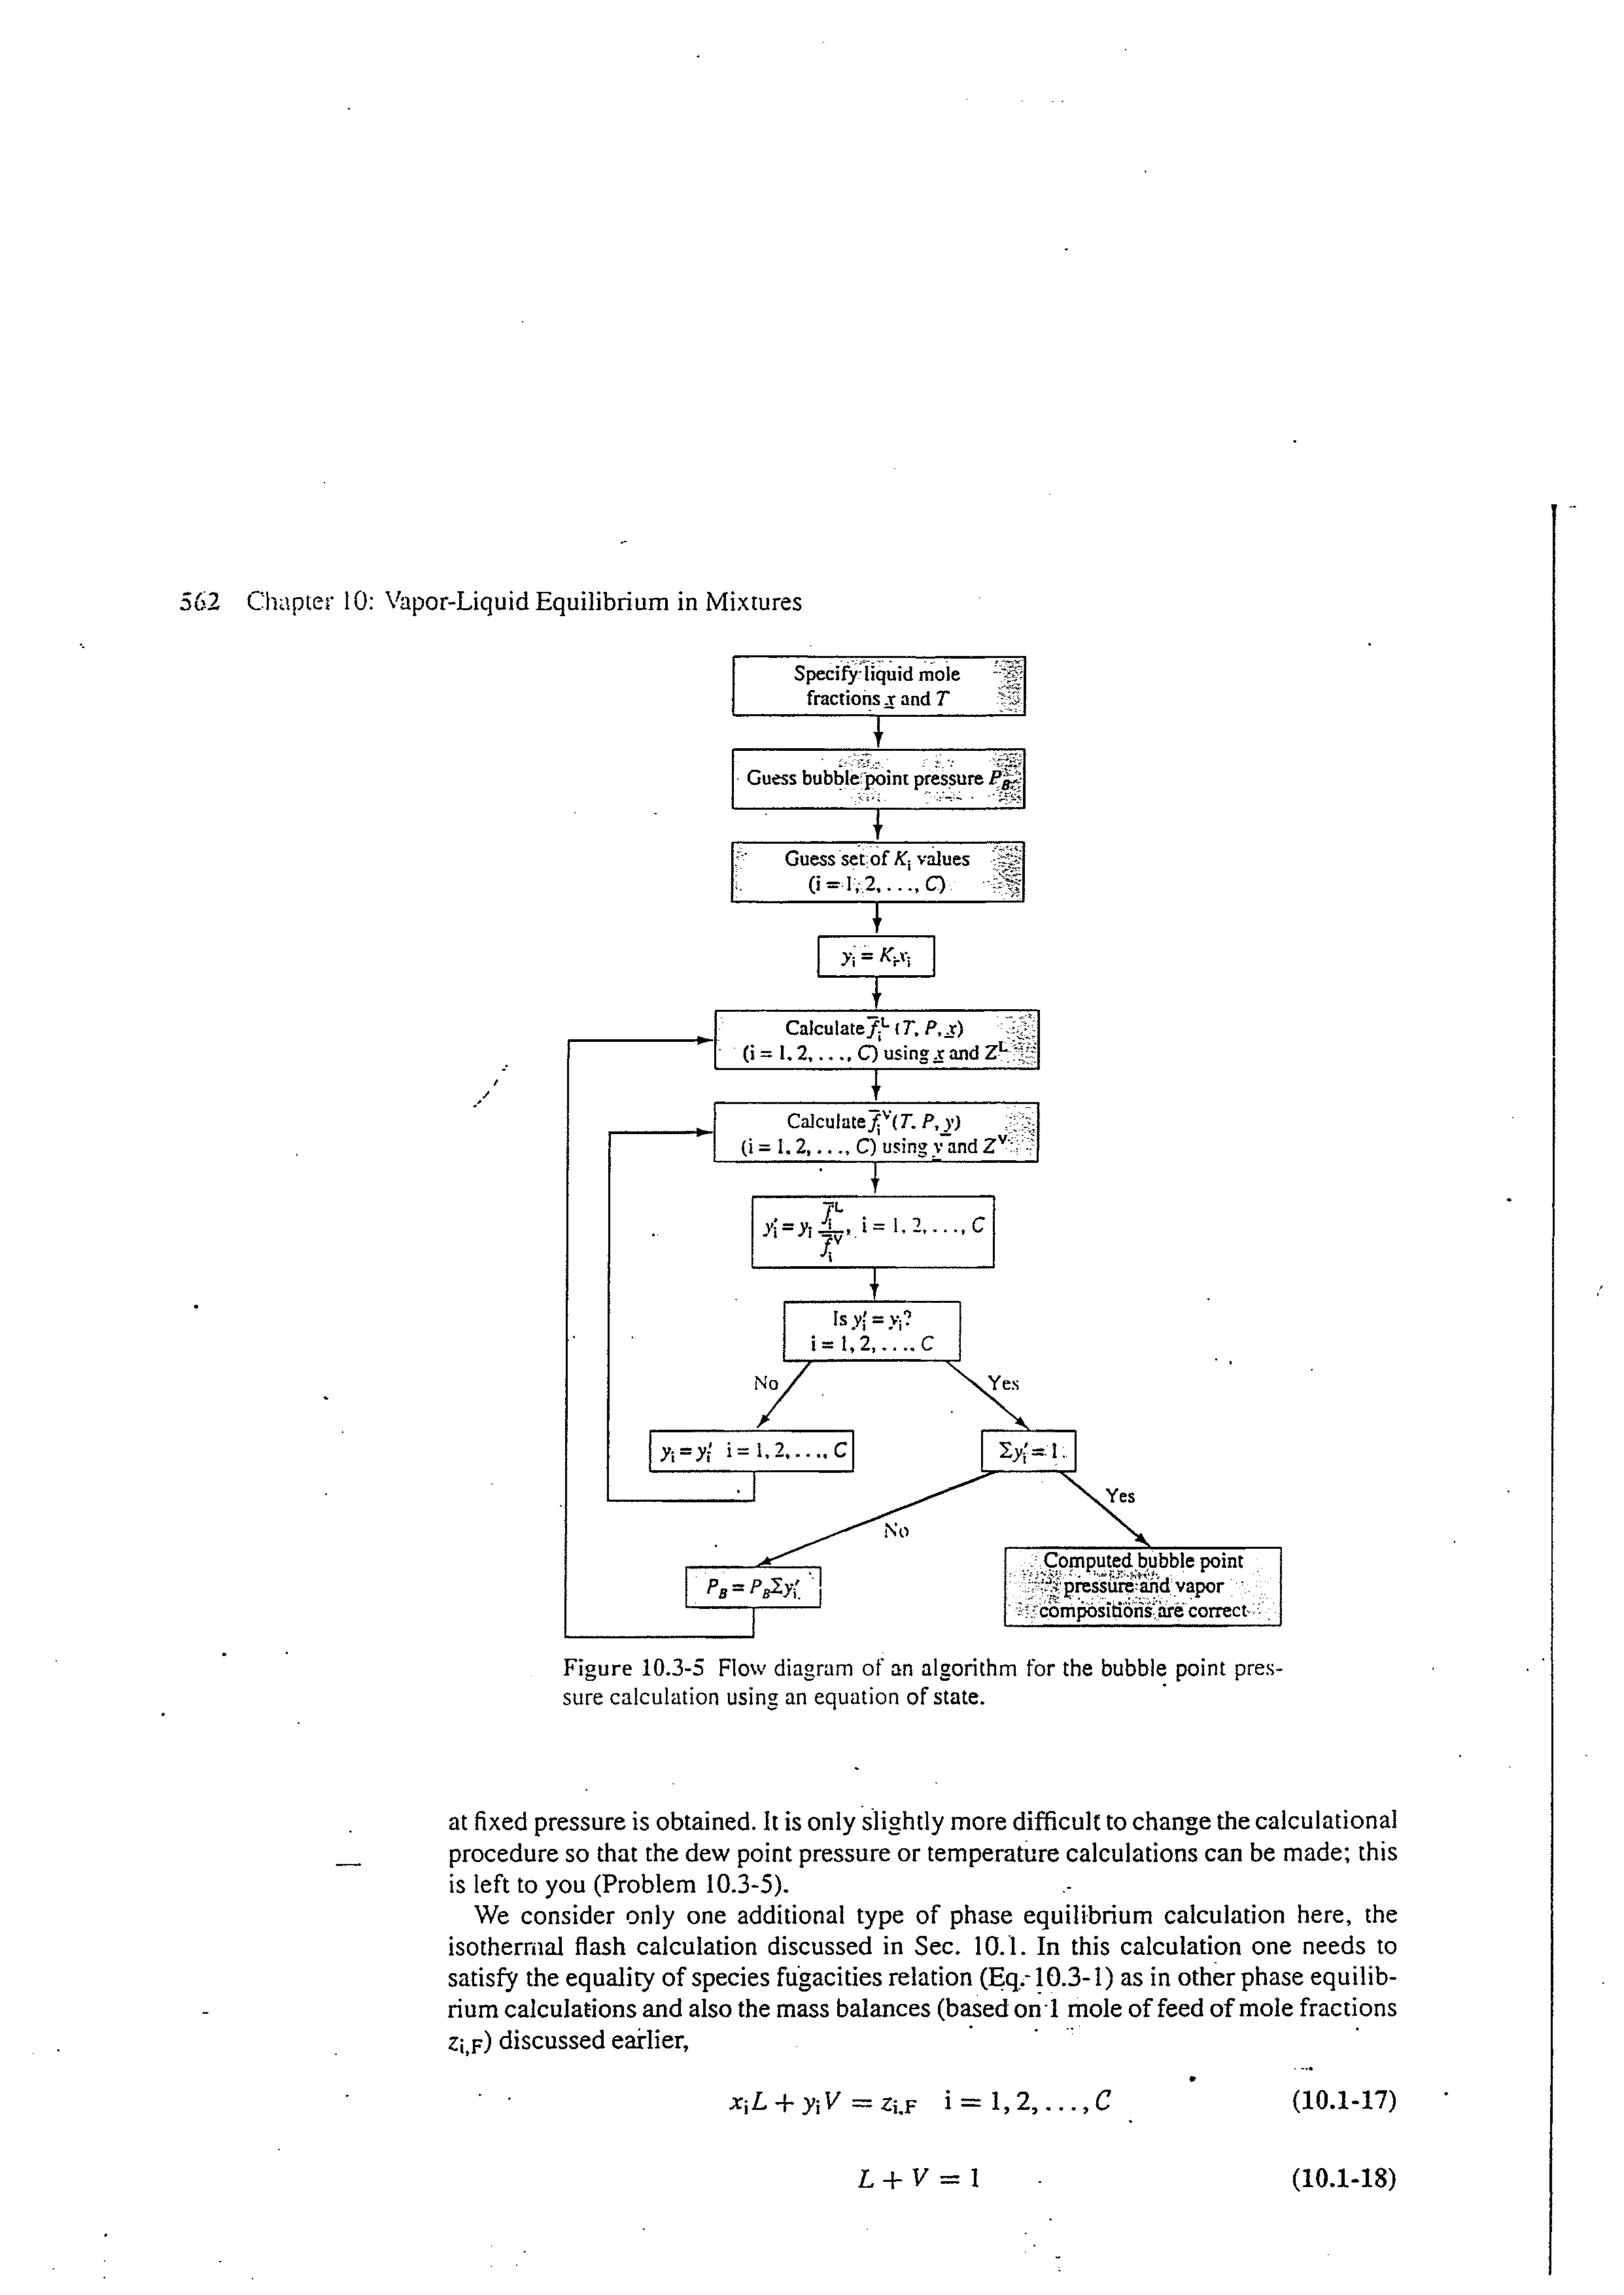 Figure 10.3-5 Flow diagram of an algorithm for the bubble point pressure calculation using an equation of state.